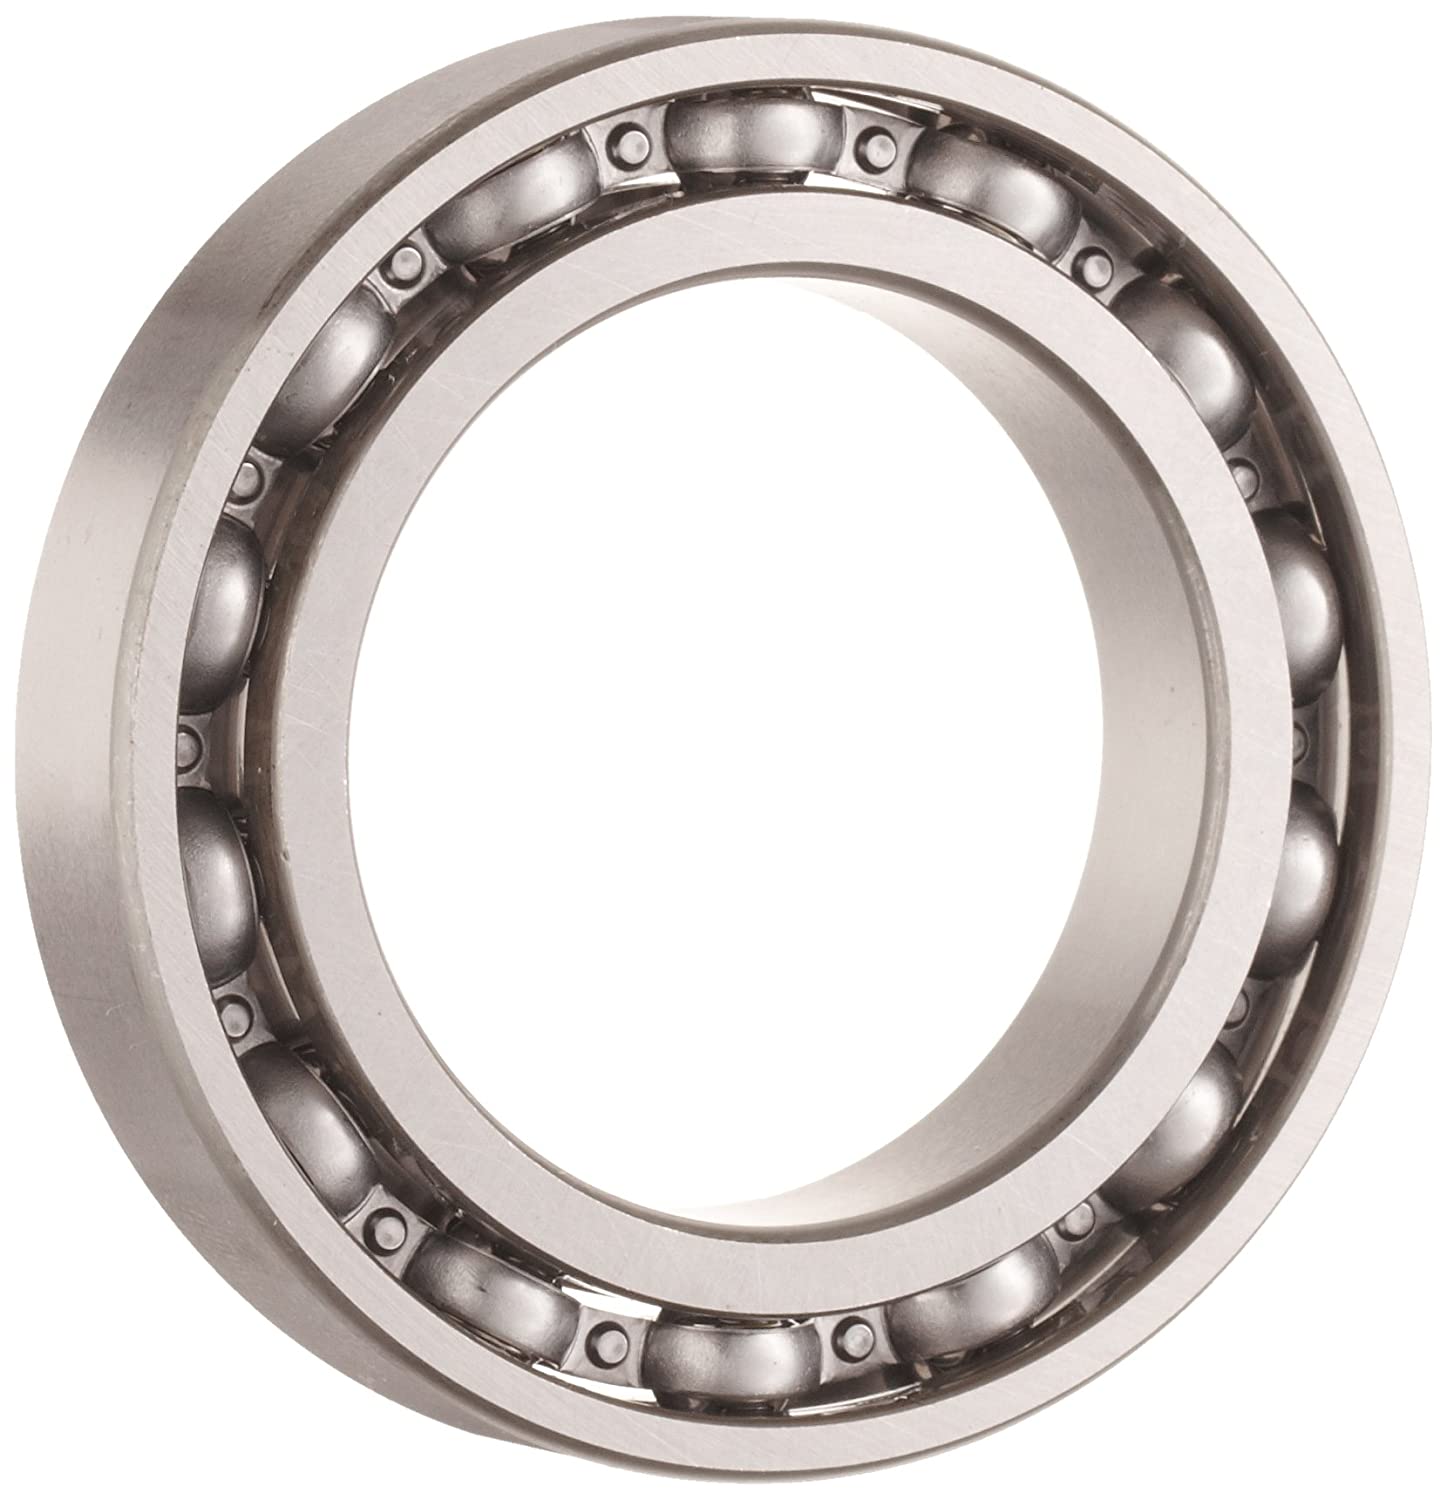 6908-2RS Deep Groove Ball Bearing 40×62×12mm Chrome Steel P0 Z2 Bearing for Industrial Machine,Power